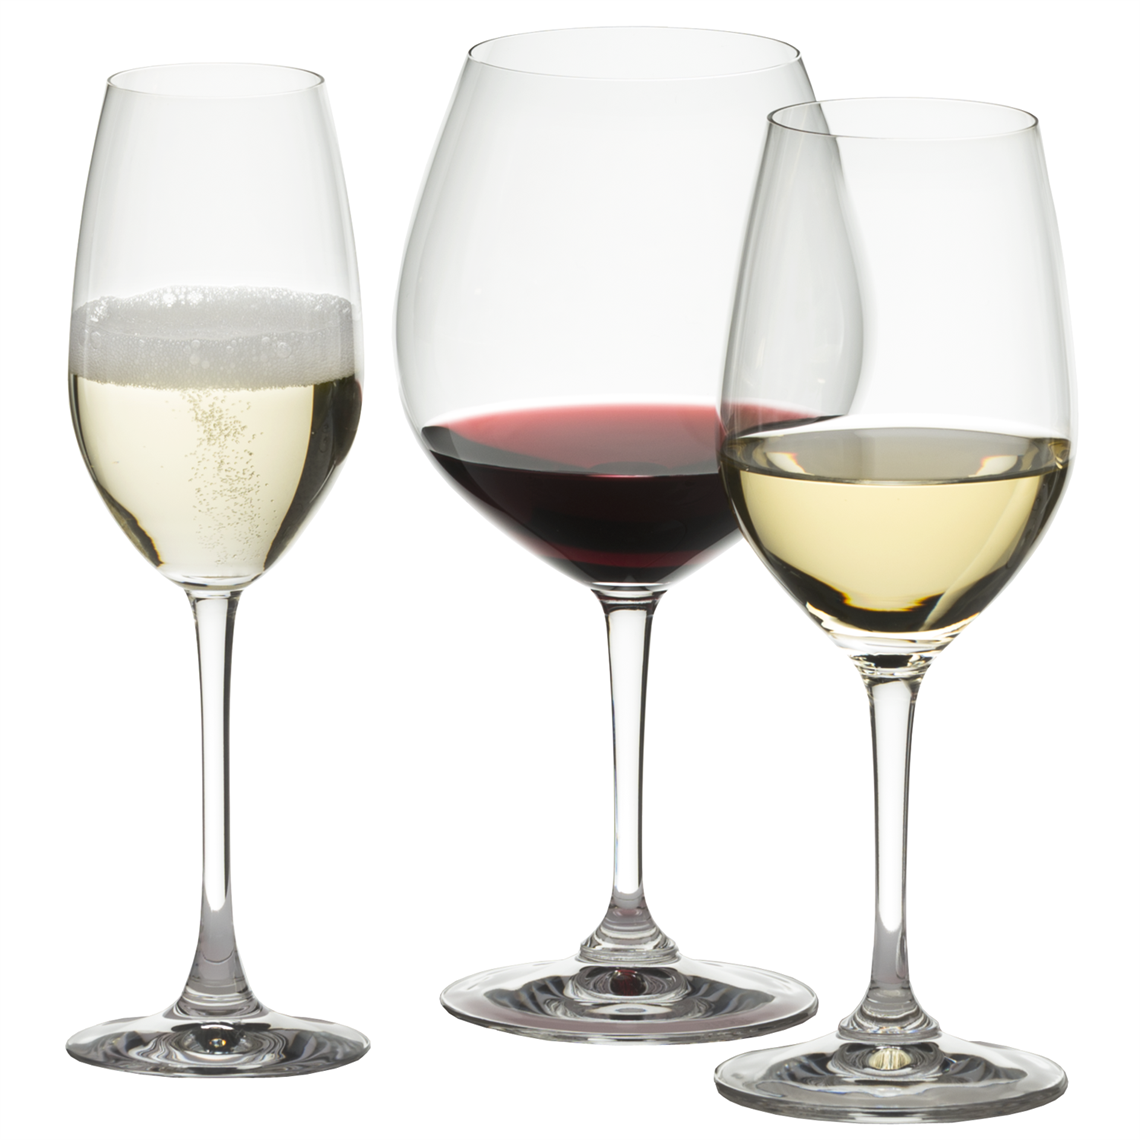 View more wine glasses from our Restaurant & Trade Glasses range